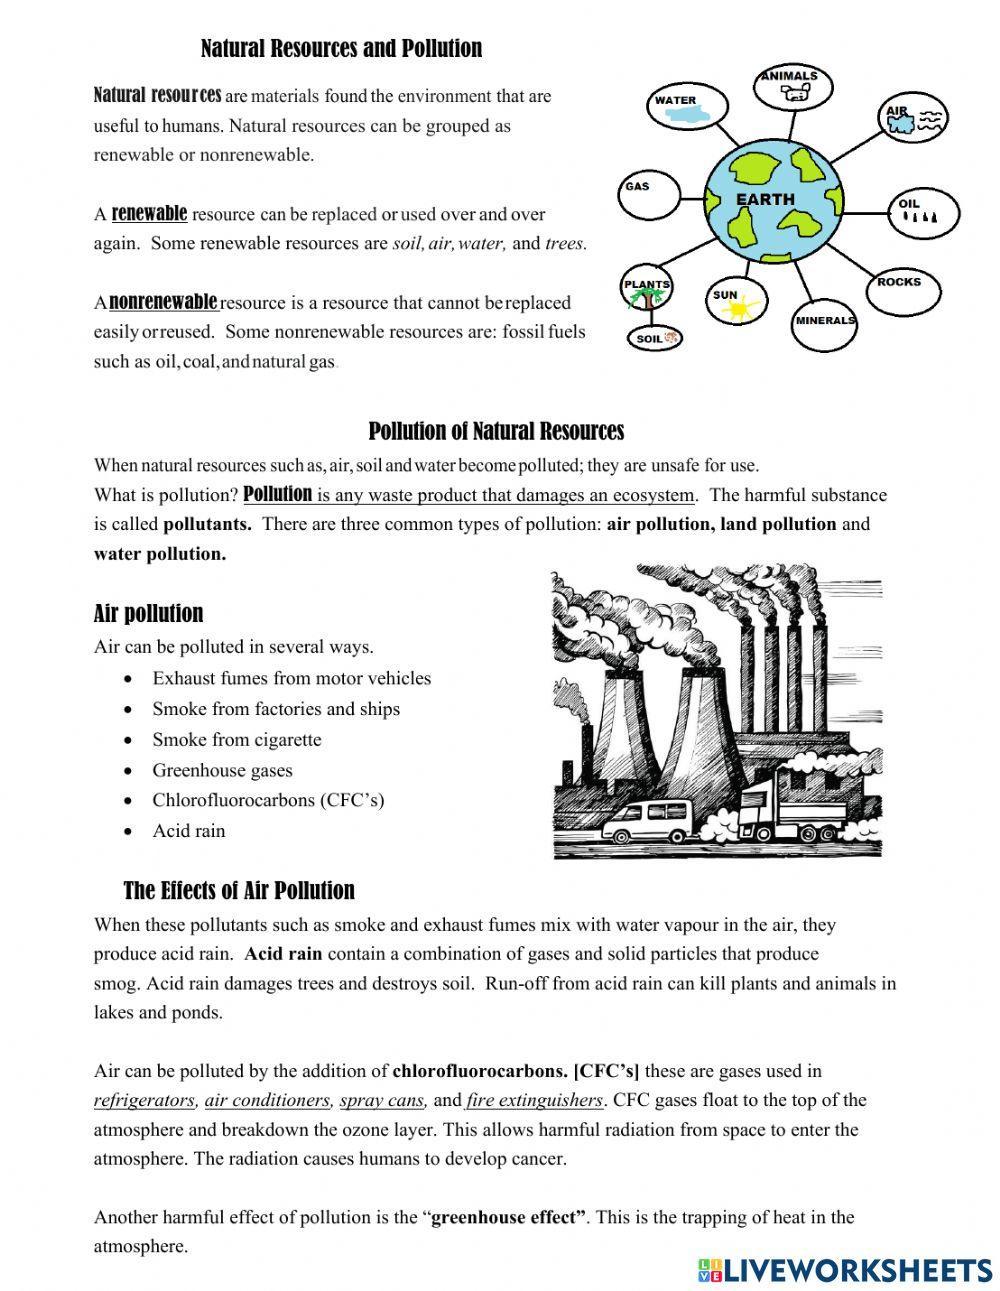 Natural Resources and Pollution